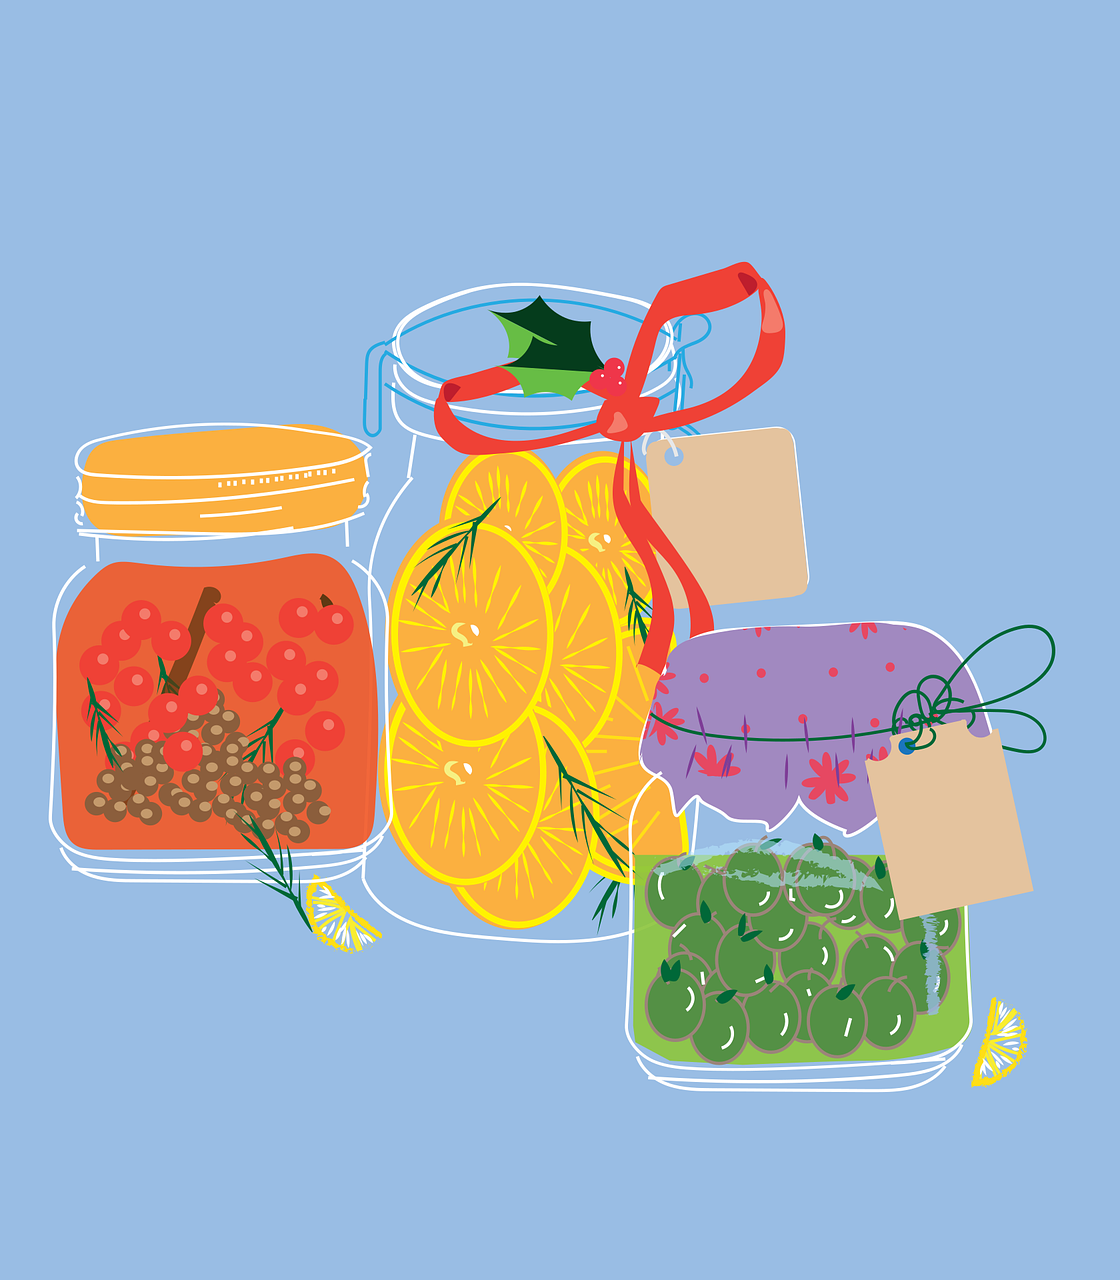 a group of jars filled with different types of food, an illustration of, naive art, organic ornaments, lemons, editorial illustration colorful, ribbon